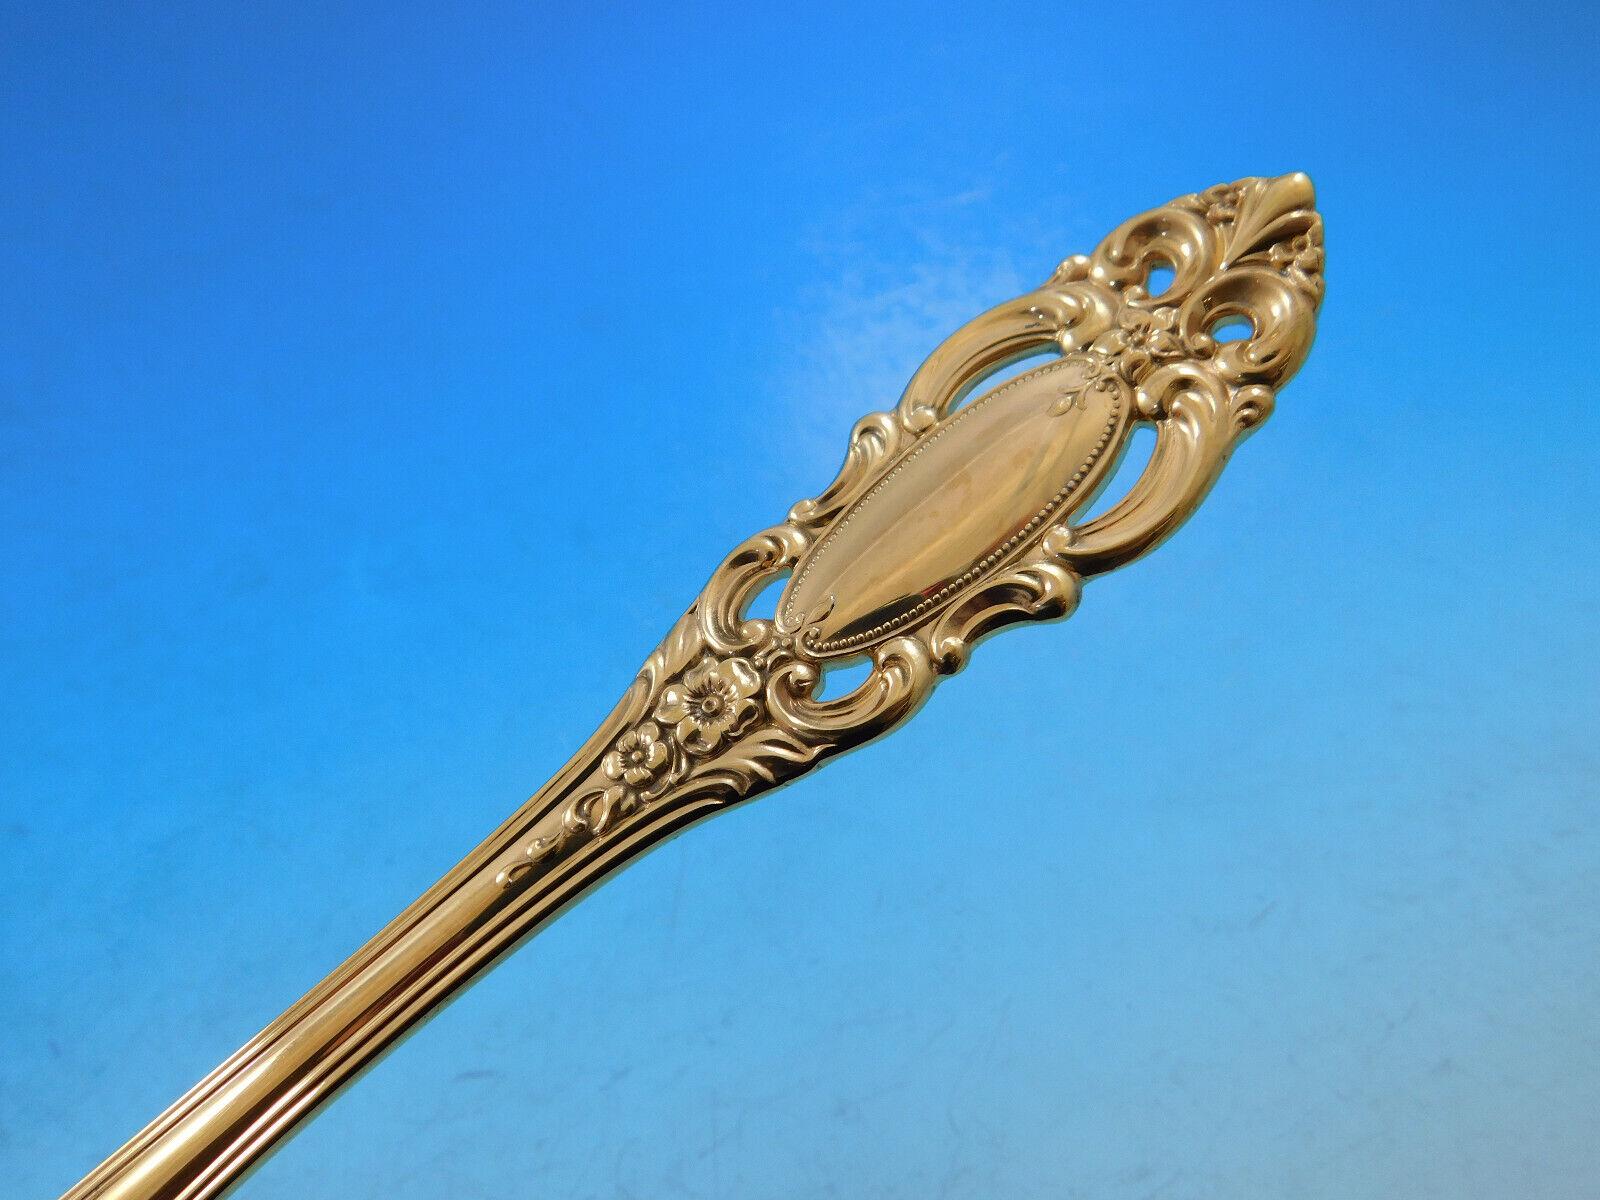 A gently tapered handle leads to a quiet work of rosettes and scrollwork, emphasizing the detail of this pattern. The oval mirror in the center of the handle acknowledges the vanity of ancient royalty, and serves as the focal point of the